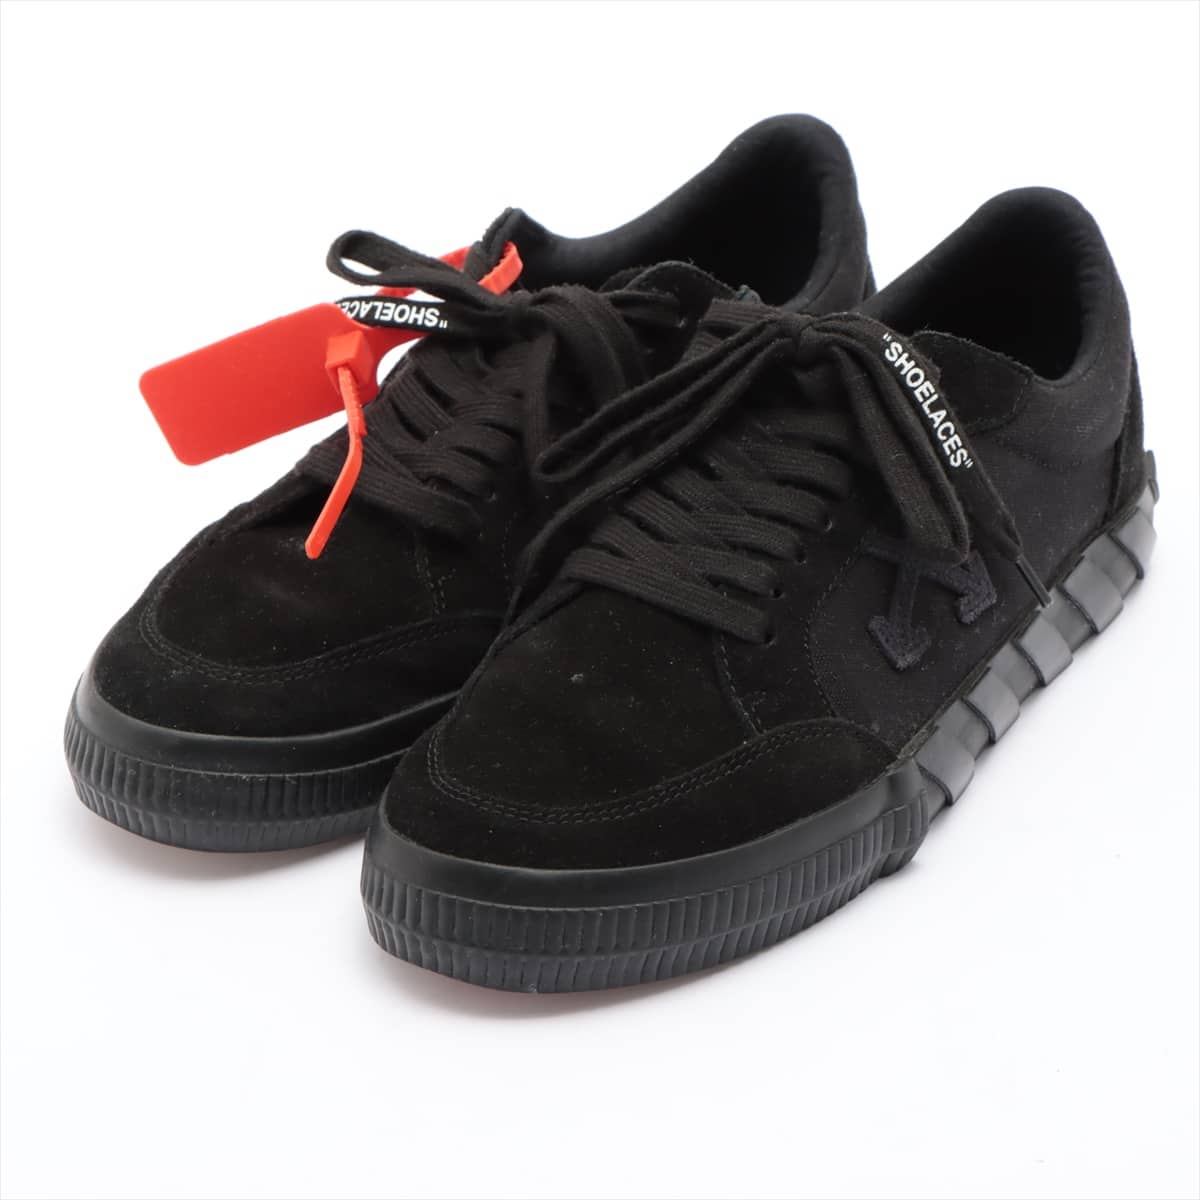 Off-White ROVAL CANIZE 20SS Suede Sneakers 41 Men's Black x red